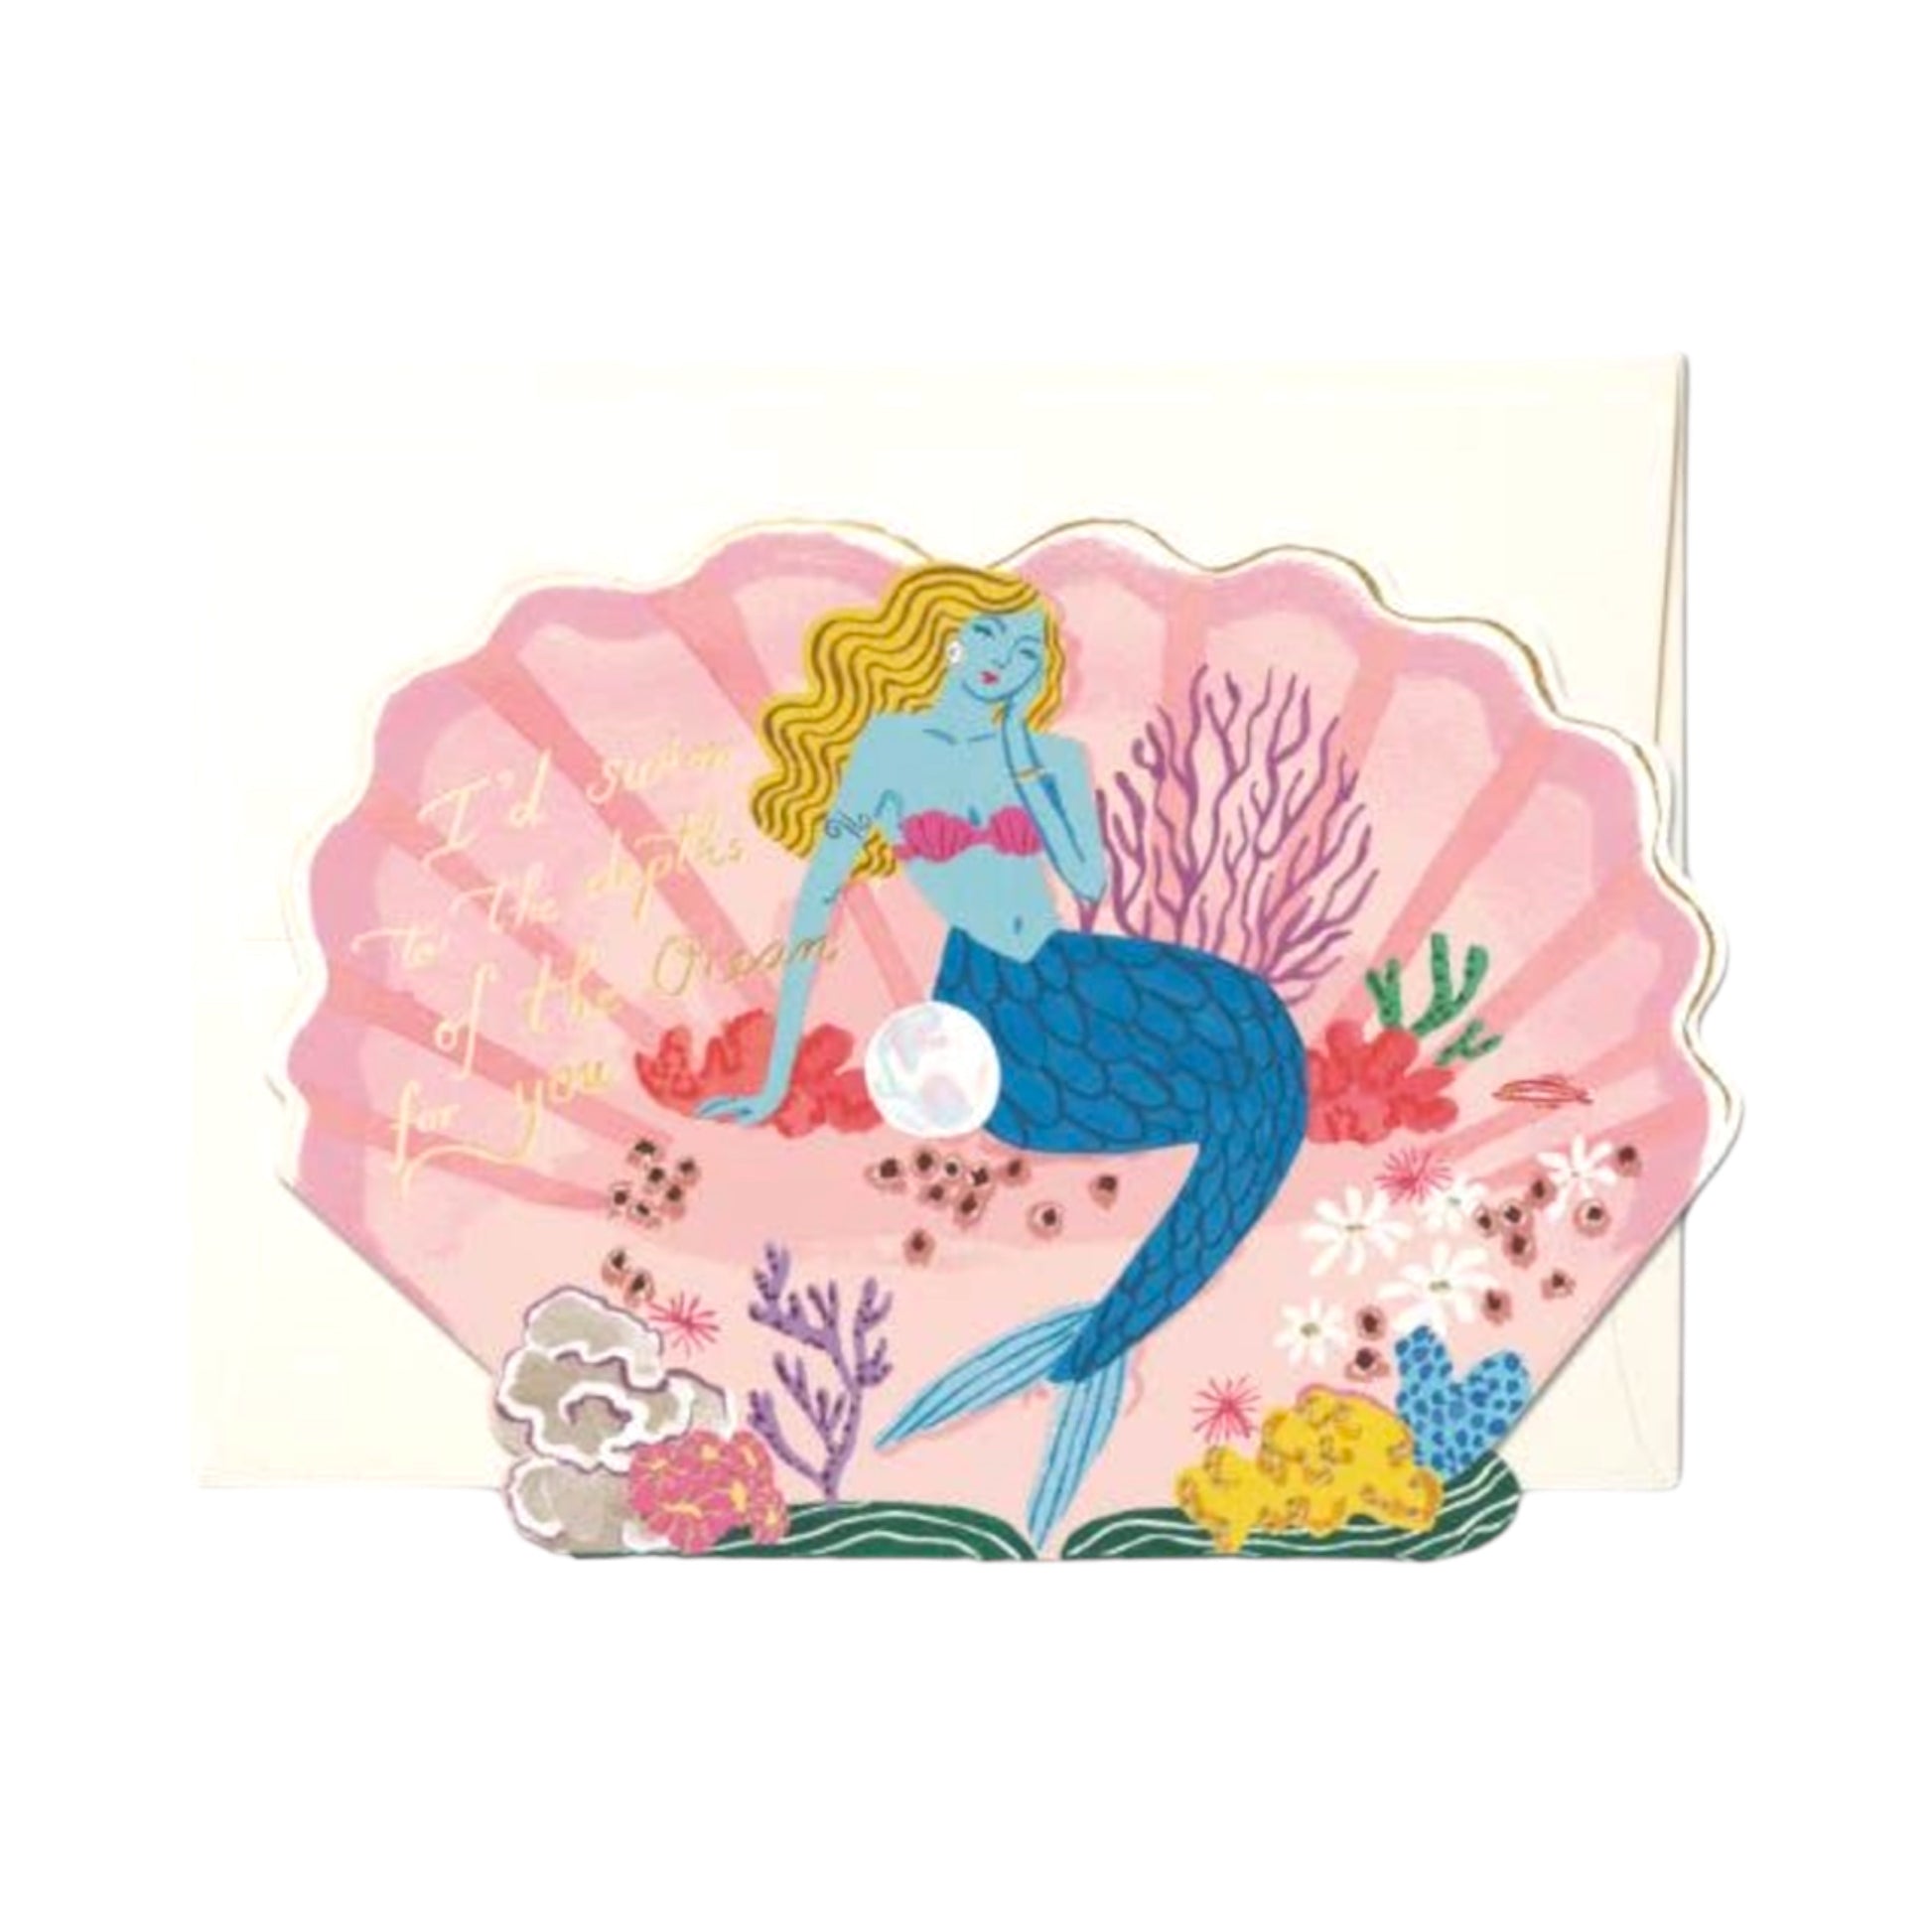 Other Fish in the Sea - Greeting Card - Hella Kitsch